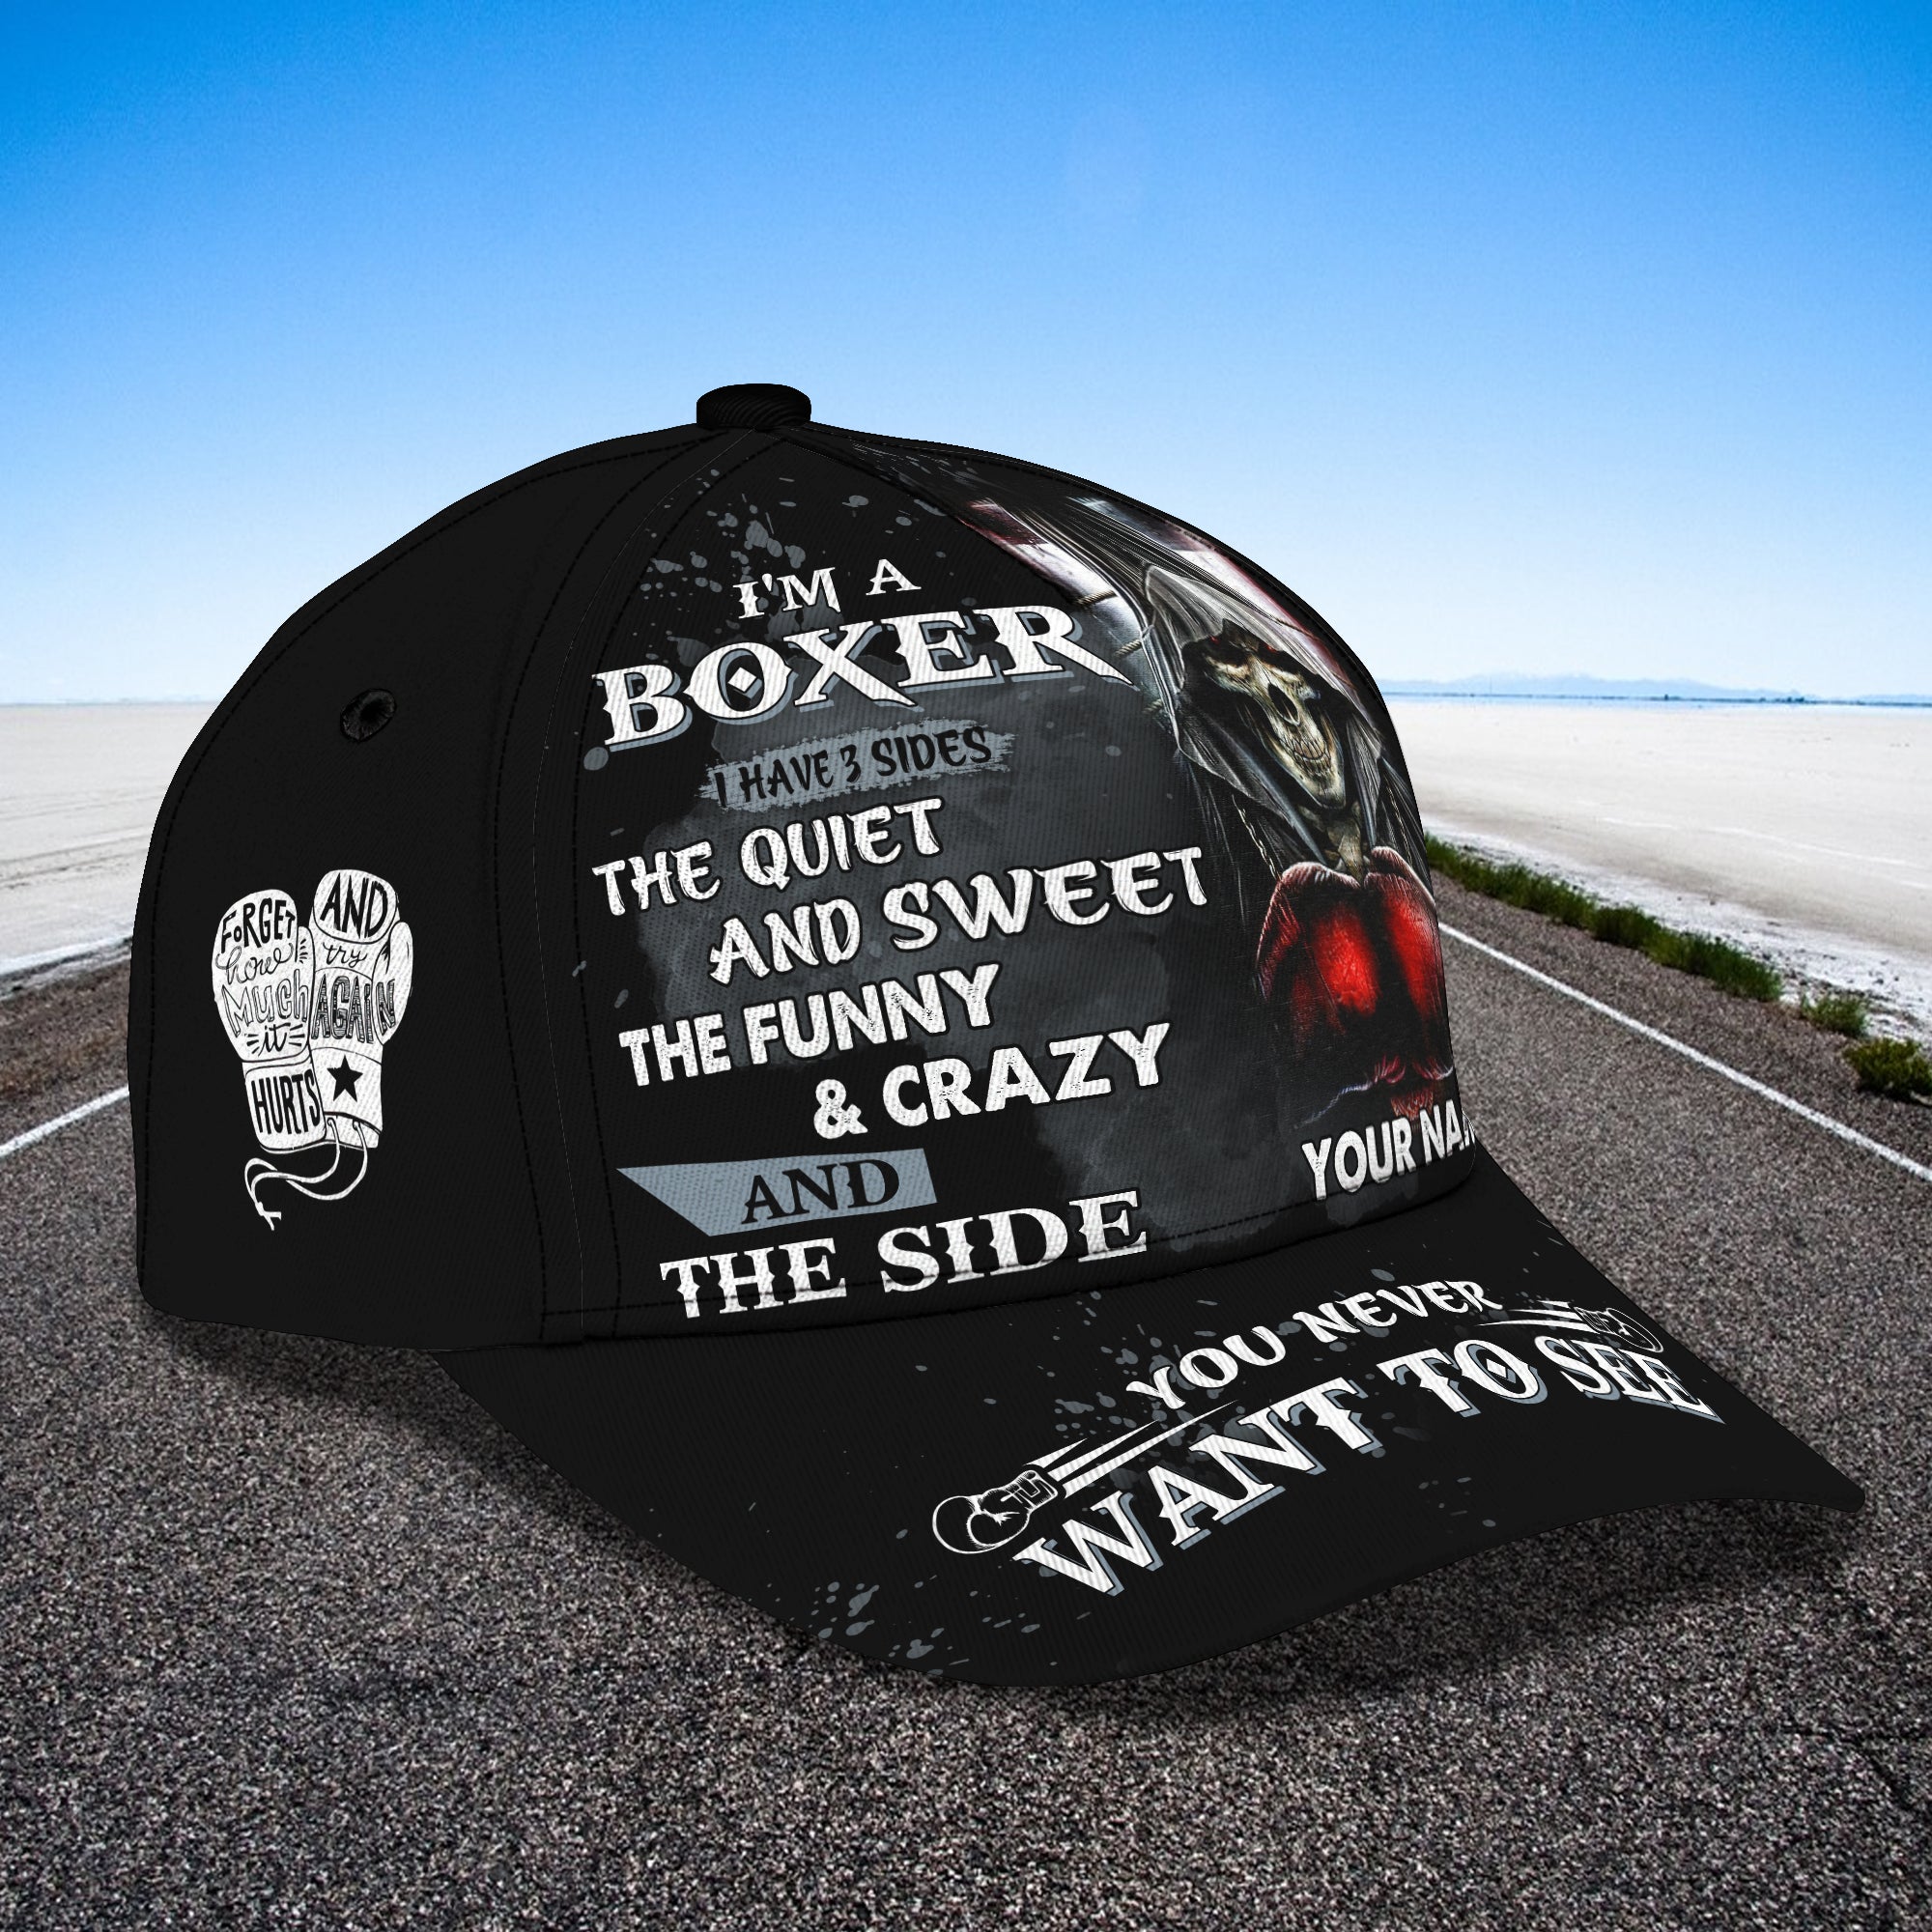 I'm A Boxer - Personalized Name Cap - Loop- T2k-198